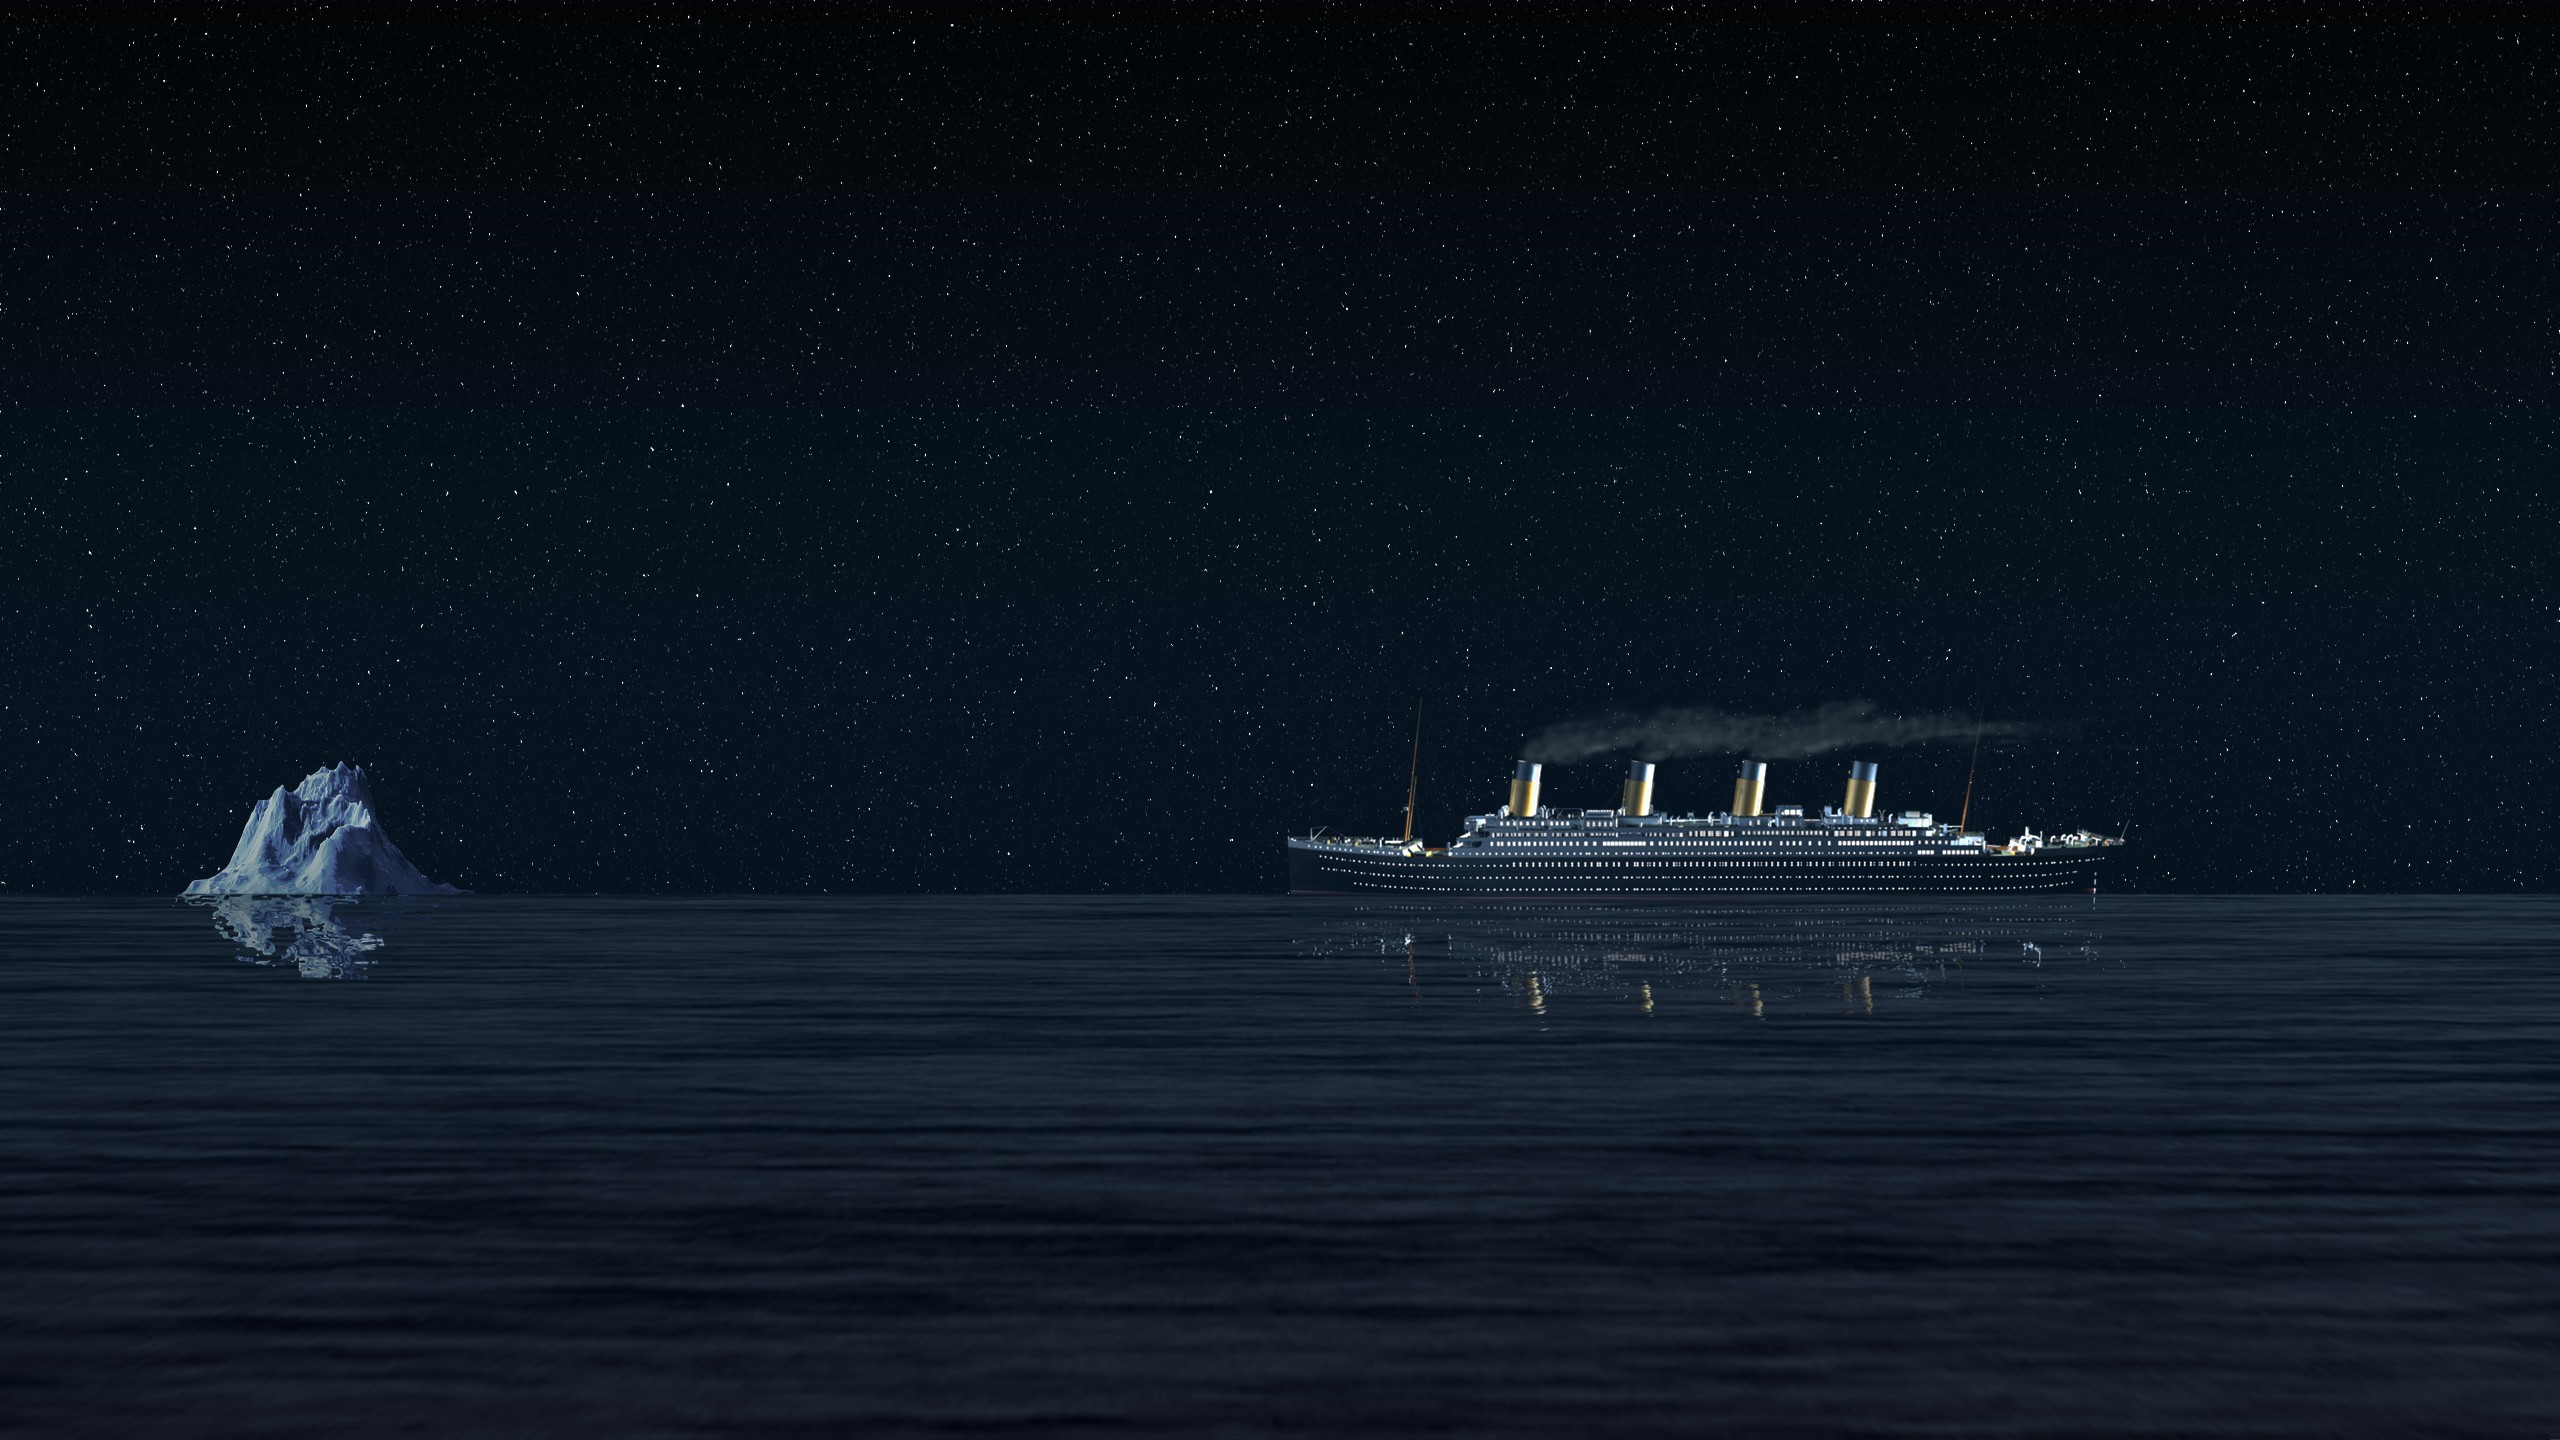 Titanic night ship history sea starry night iceberg p k k hd wallpapers backgrounds free download rare gallery